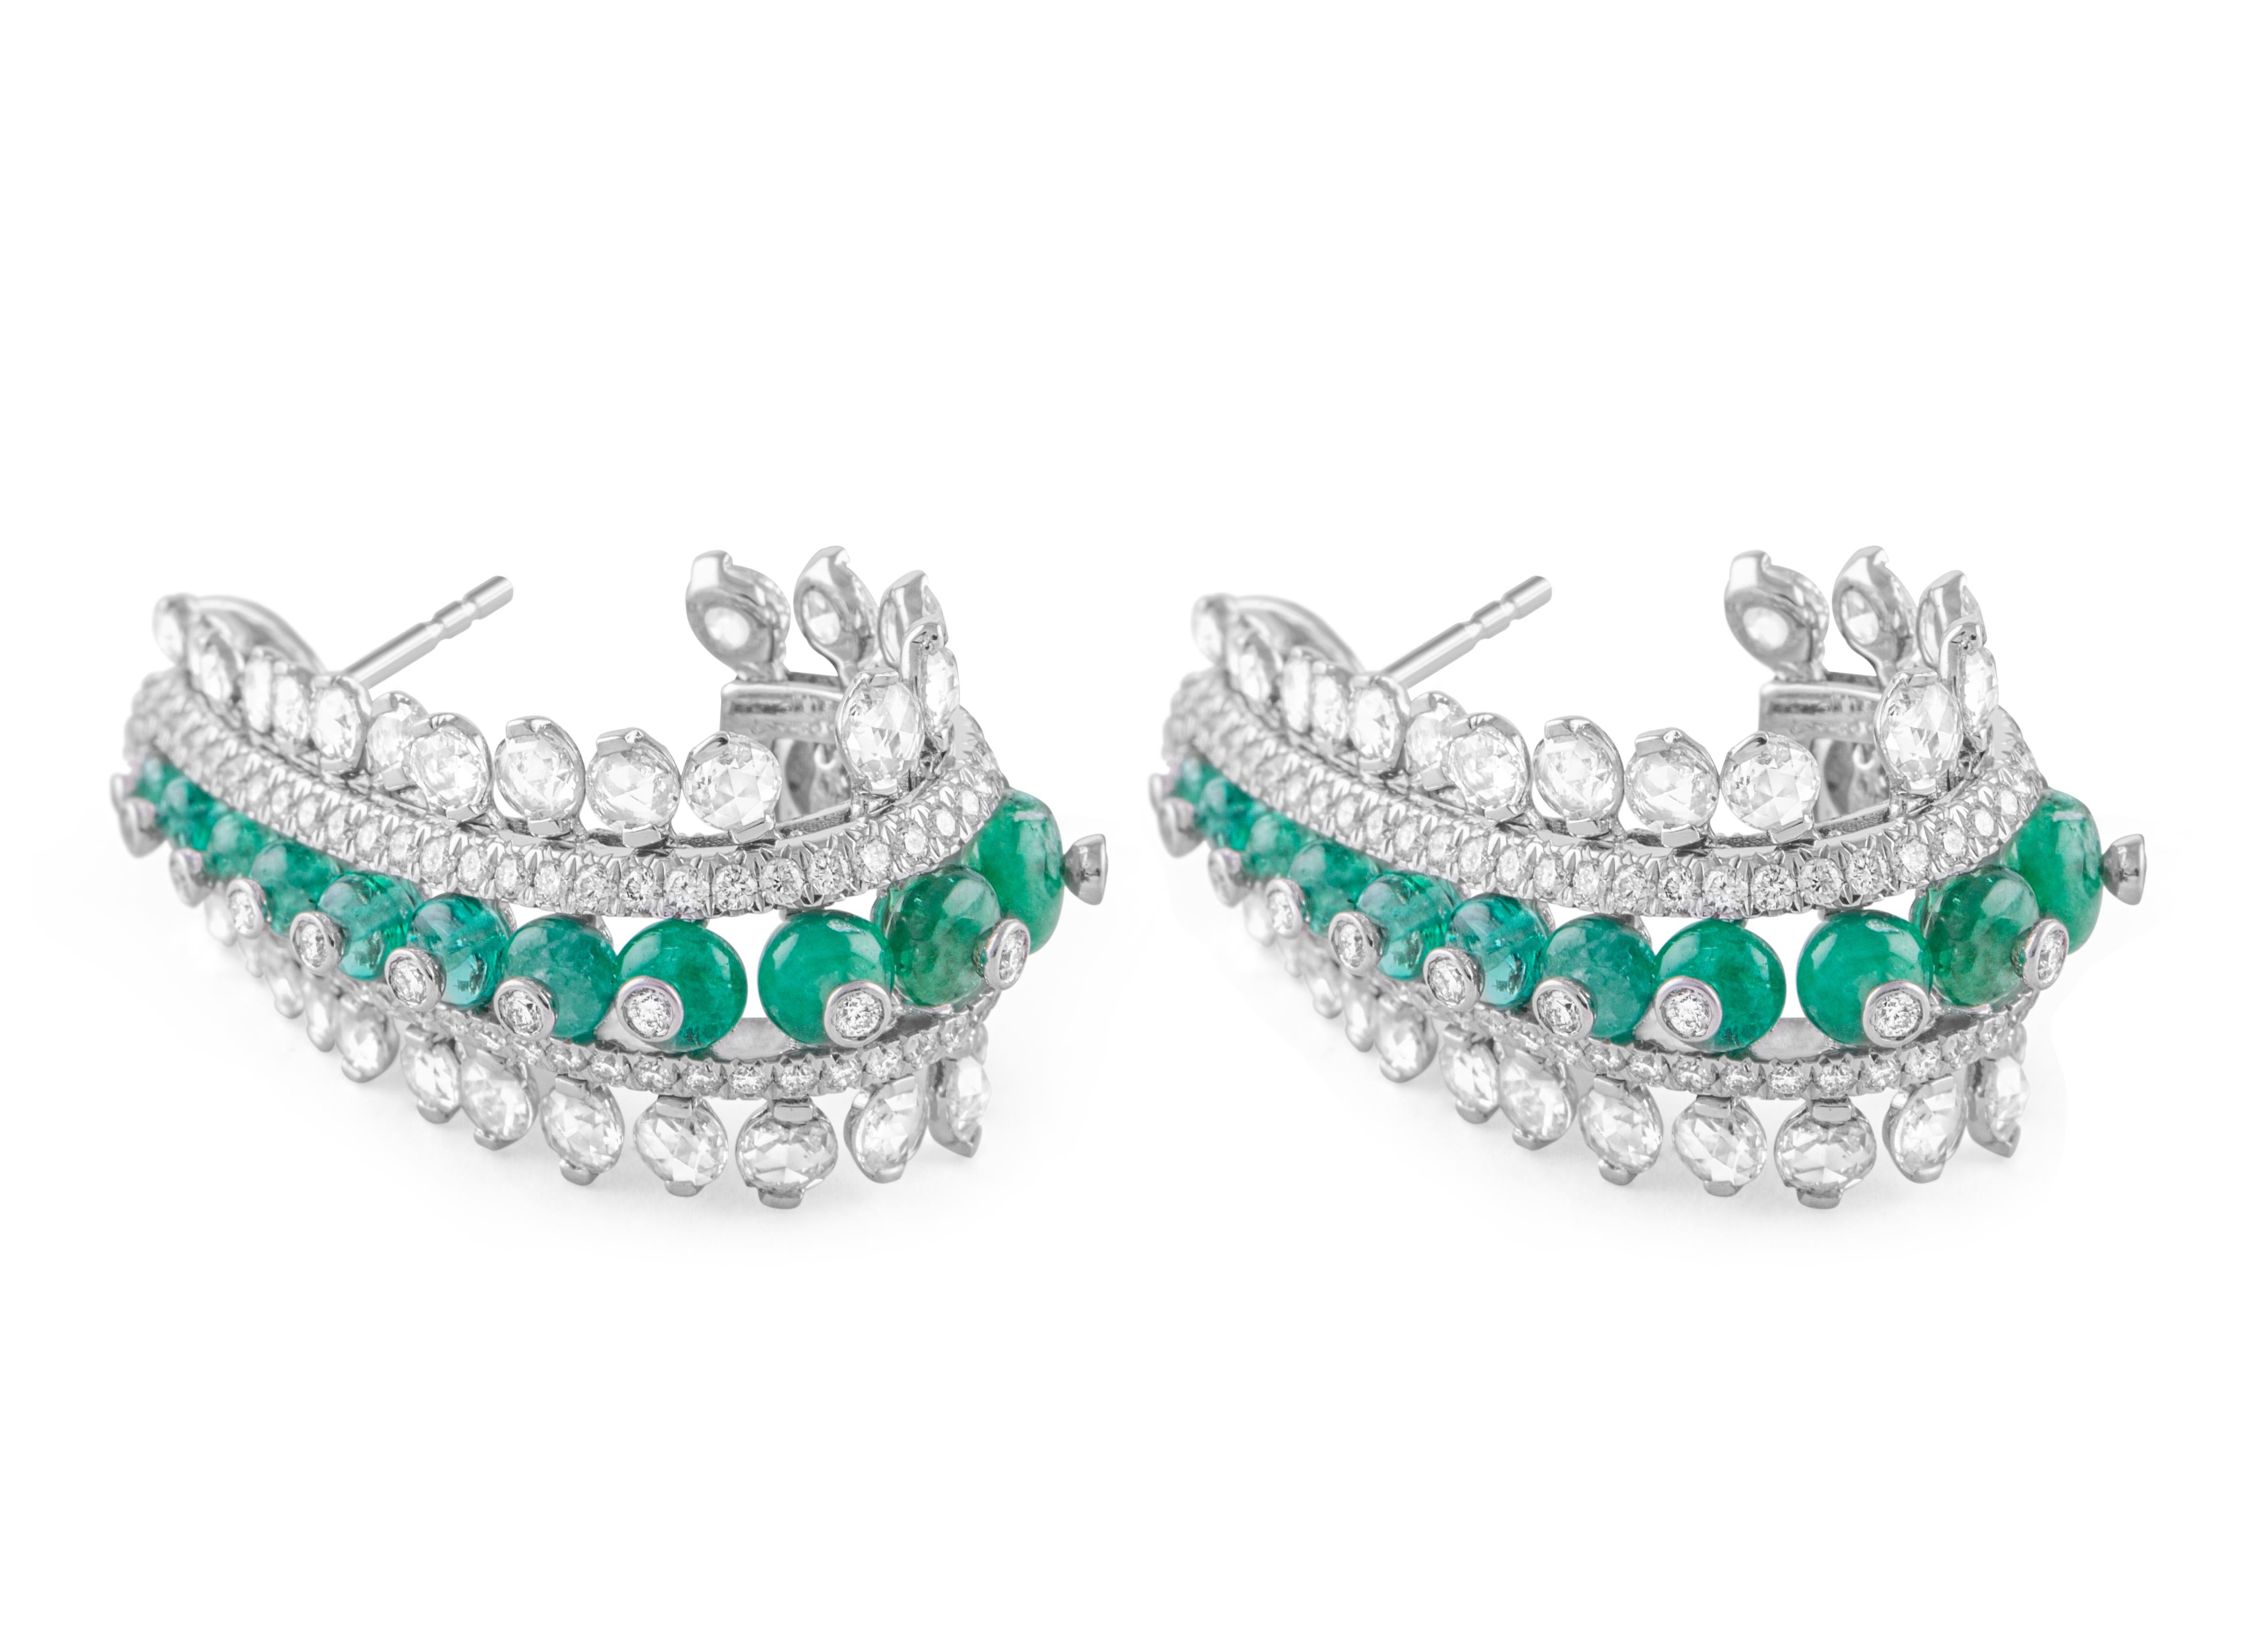 Contemporary 18 Karat White Gold Columbian Emerald and Diamond Earrings For Sale